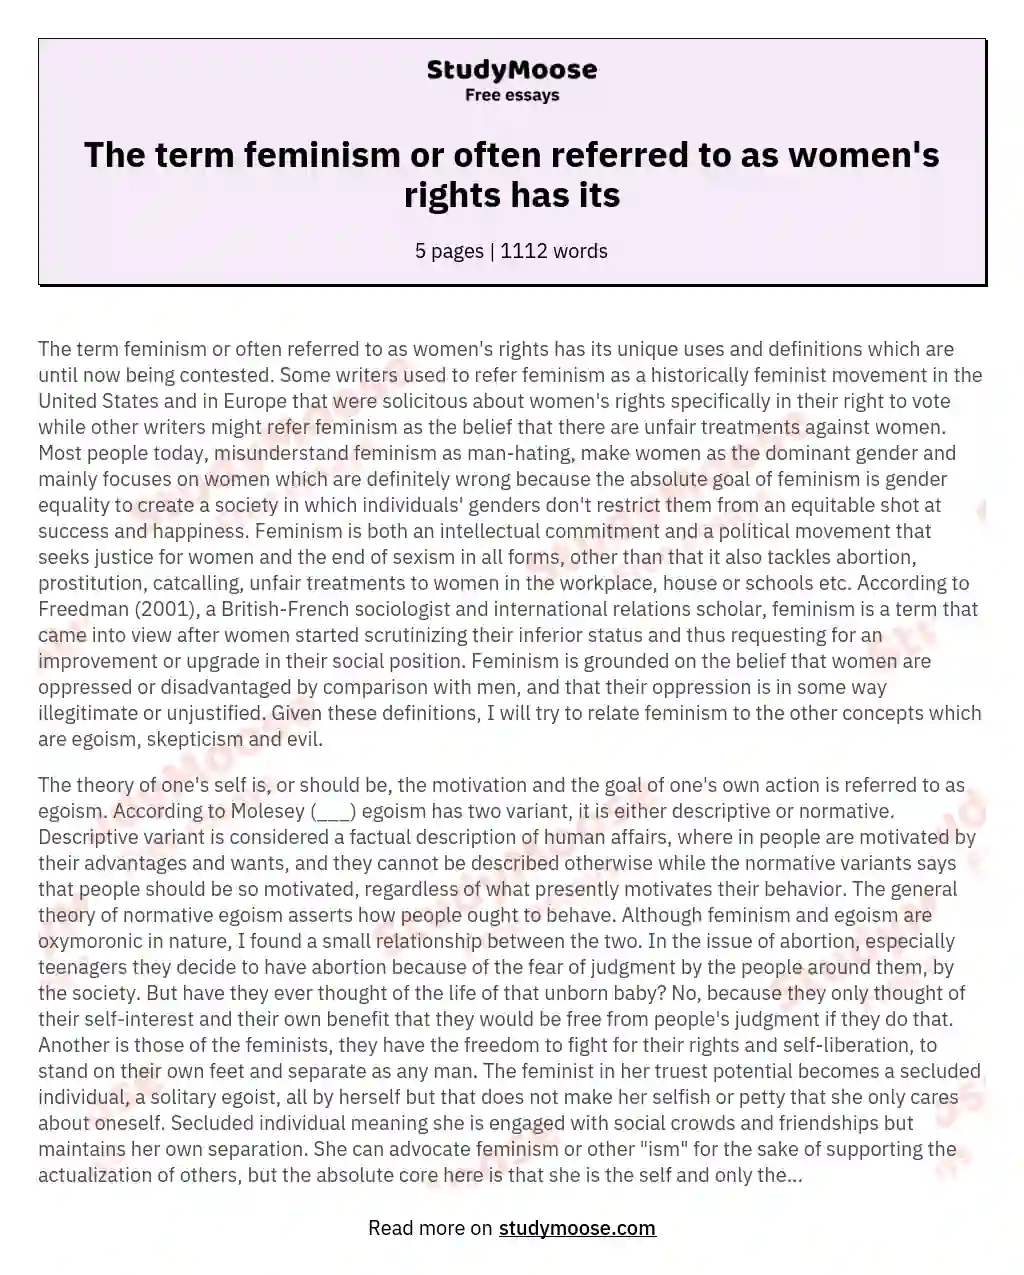 The term feminism or often referred to as women's rights has its essay